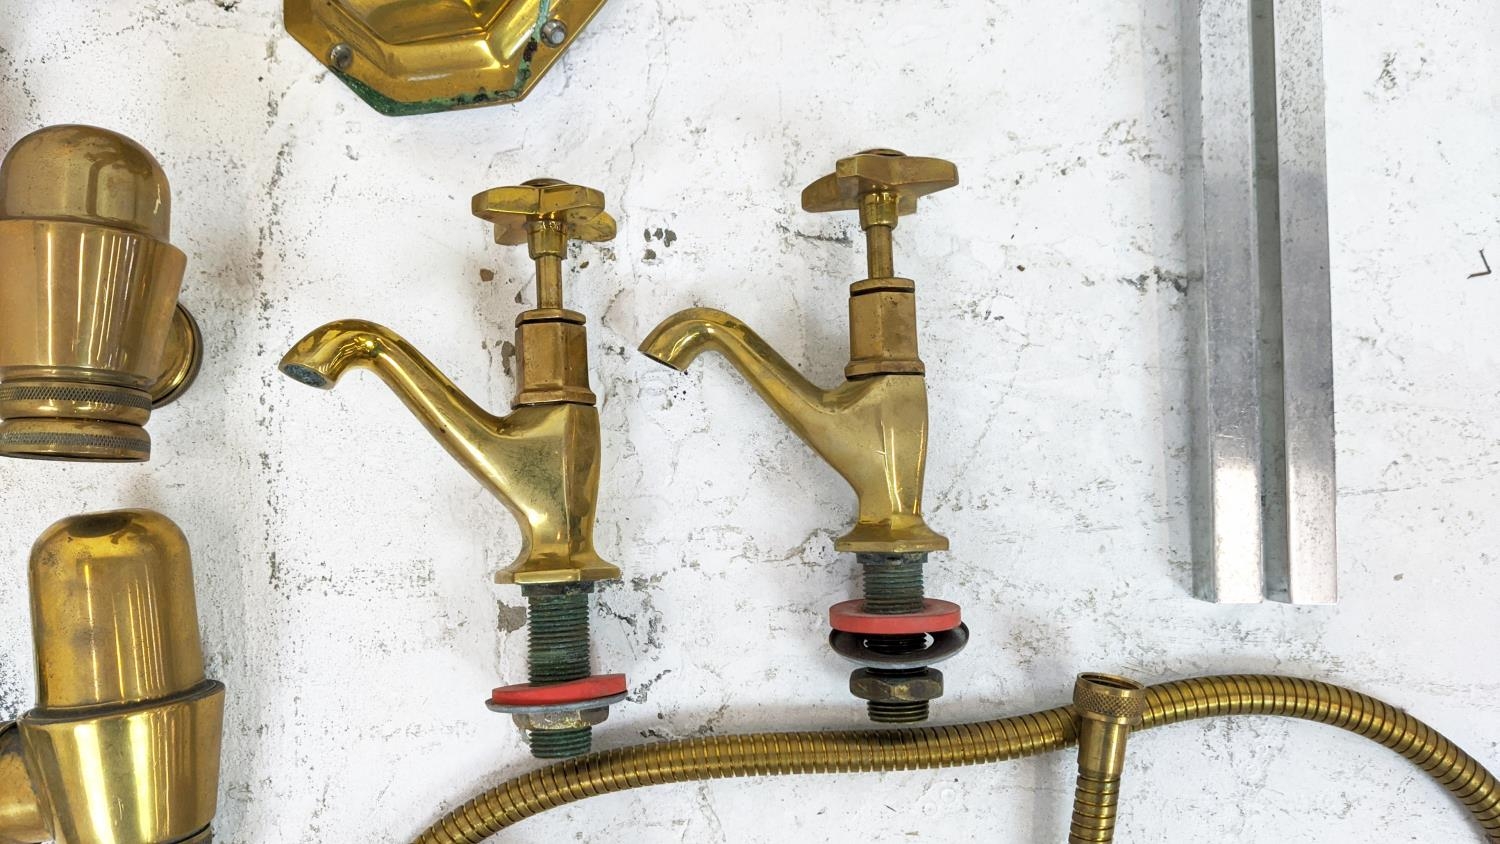 TAPS, brass, French Art Deco design, one pair of basin taps, one mixer tap and a mixer/shower bath - Image 4 of 6